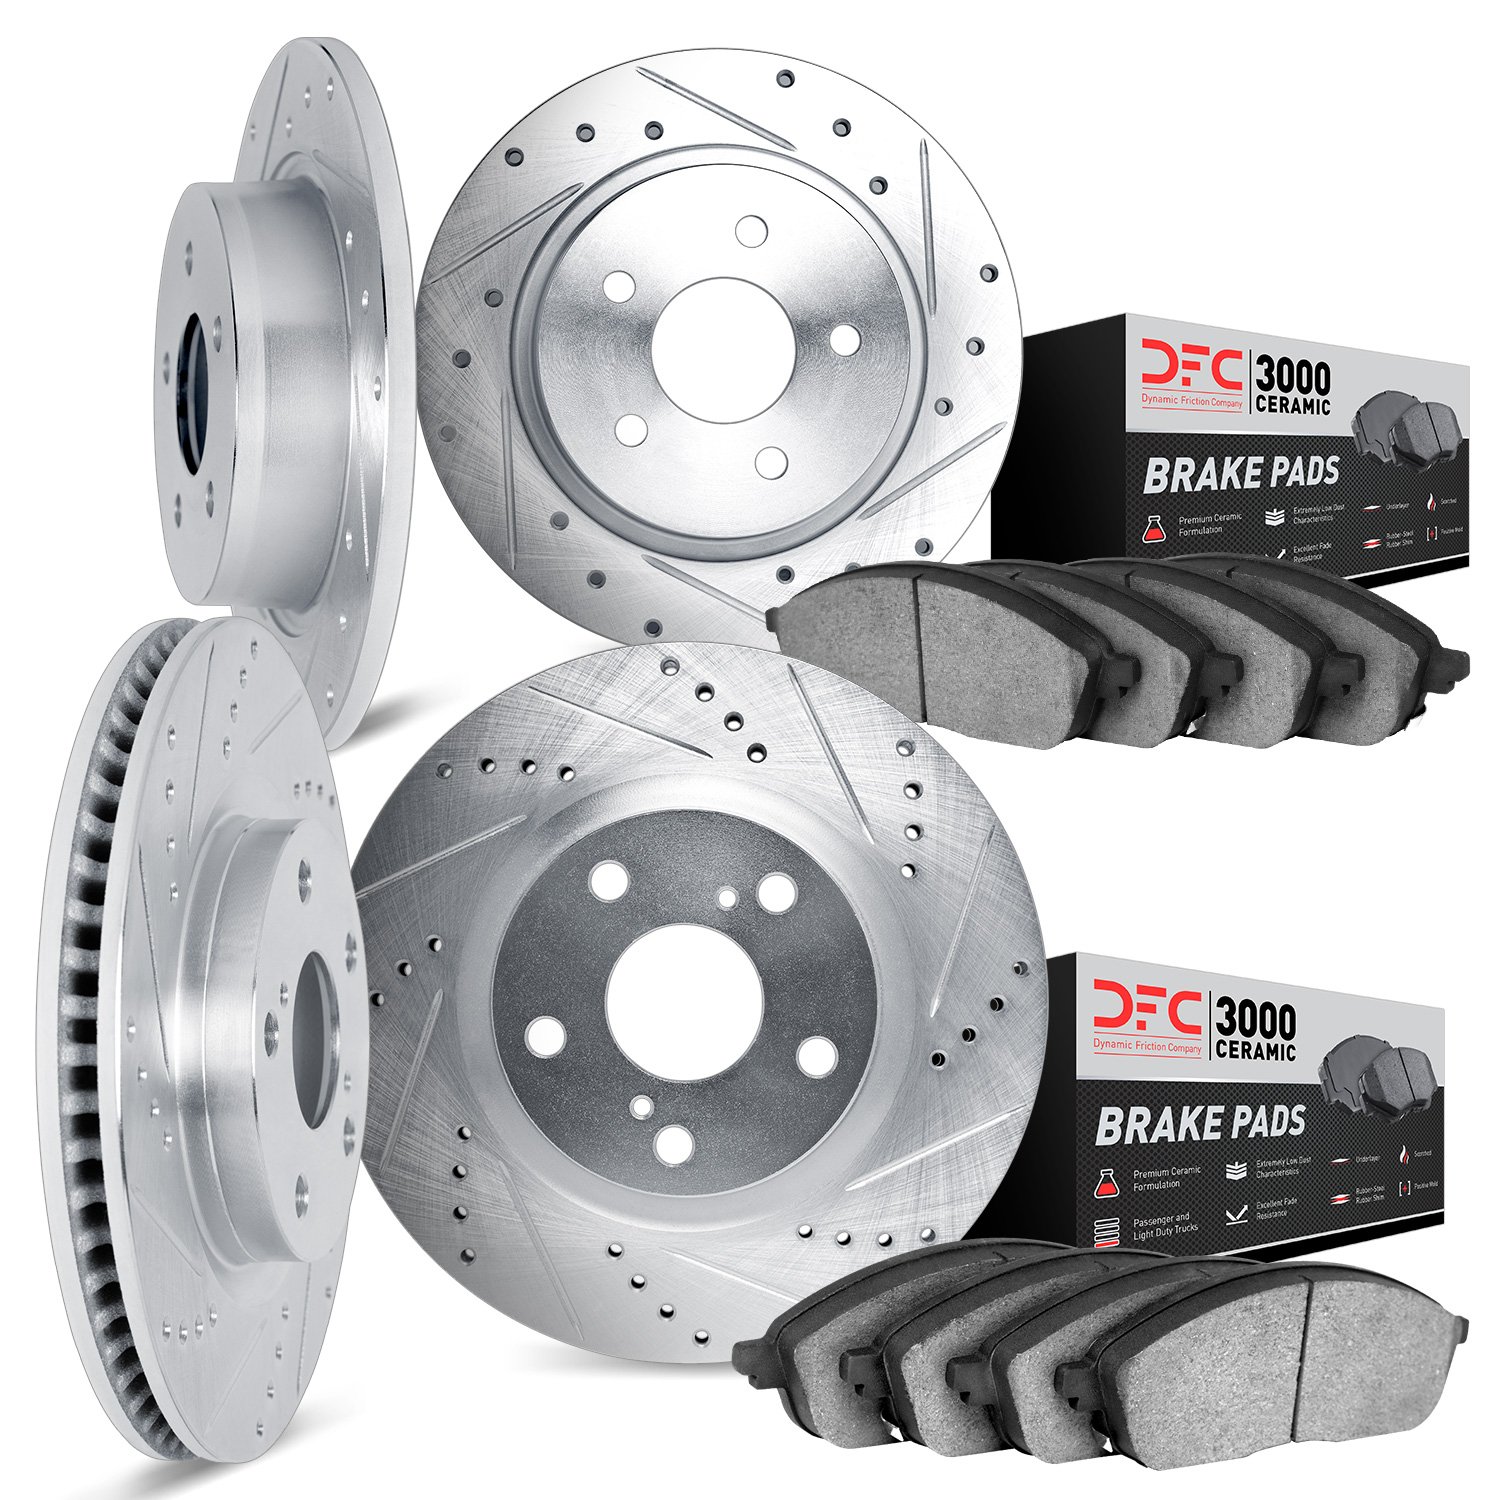 7304-54029 Drilled/Slotted Brake Rotor with 3000-Series Ceramic Brake Pads Kit [Silver], 1997-2004 Ford/Lincoln/Mercury/Mazda, P